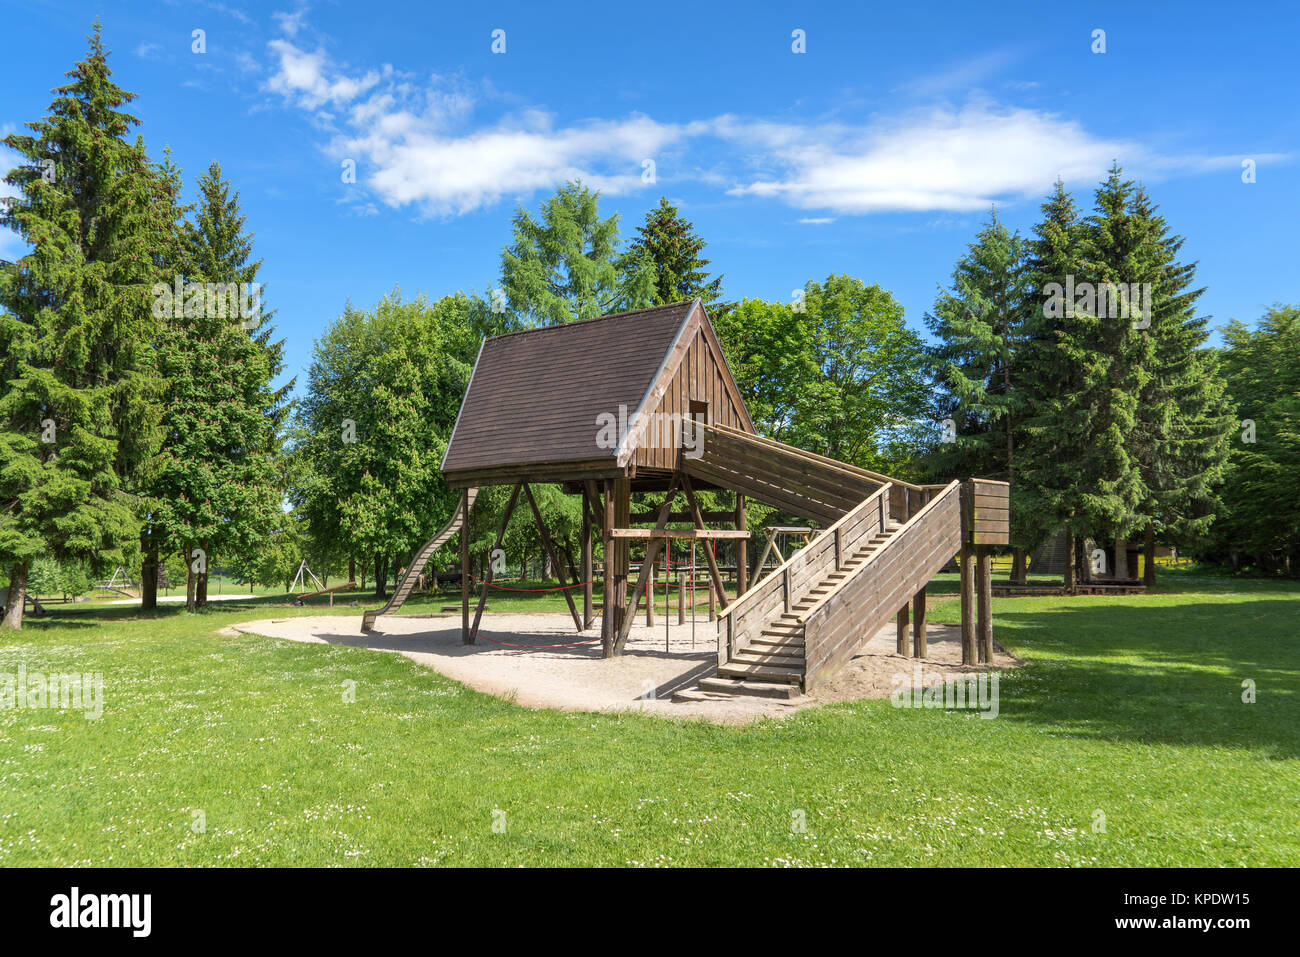 playground with wooden house in a clearing in the forest - rossberg,swabian alb Stock Photo